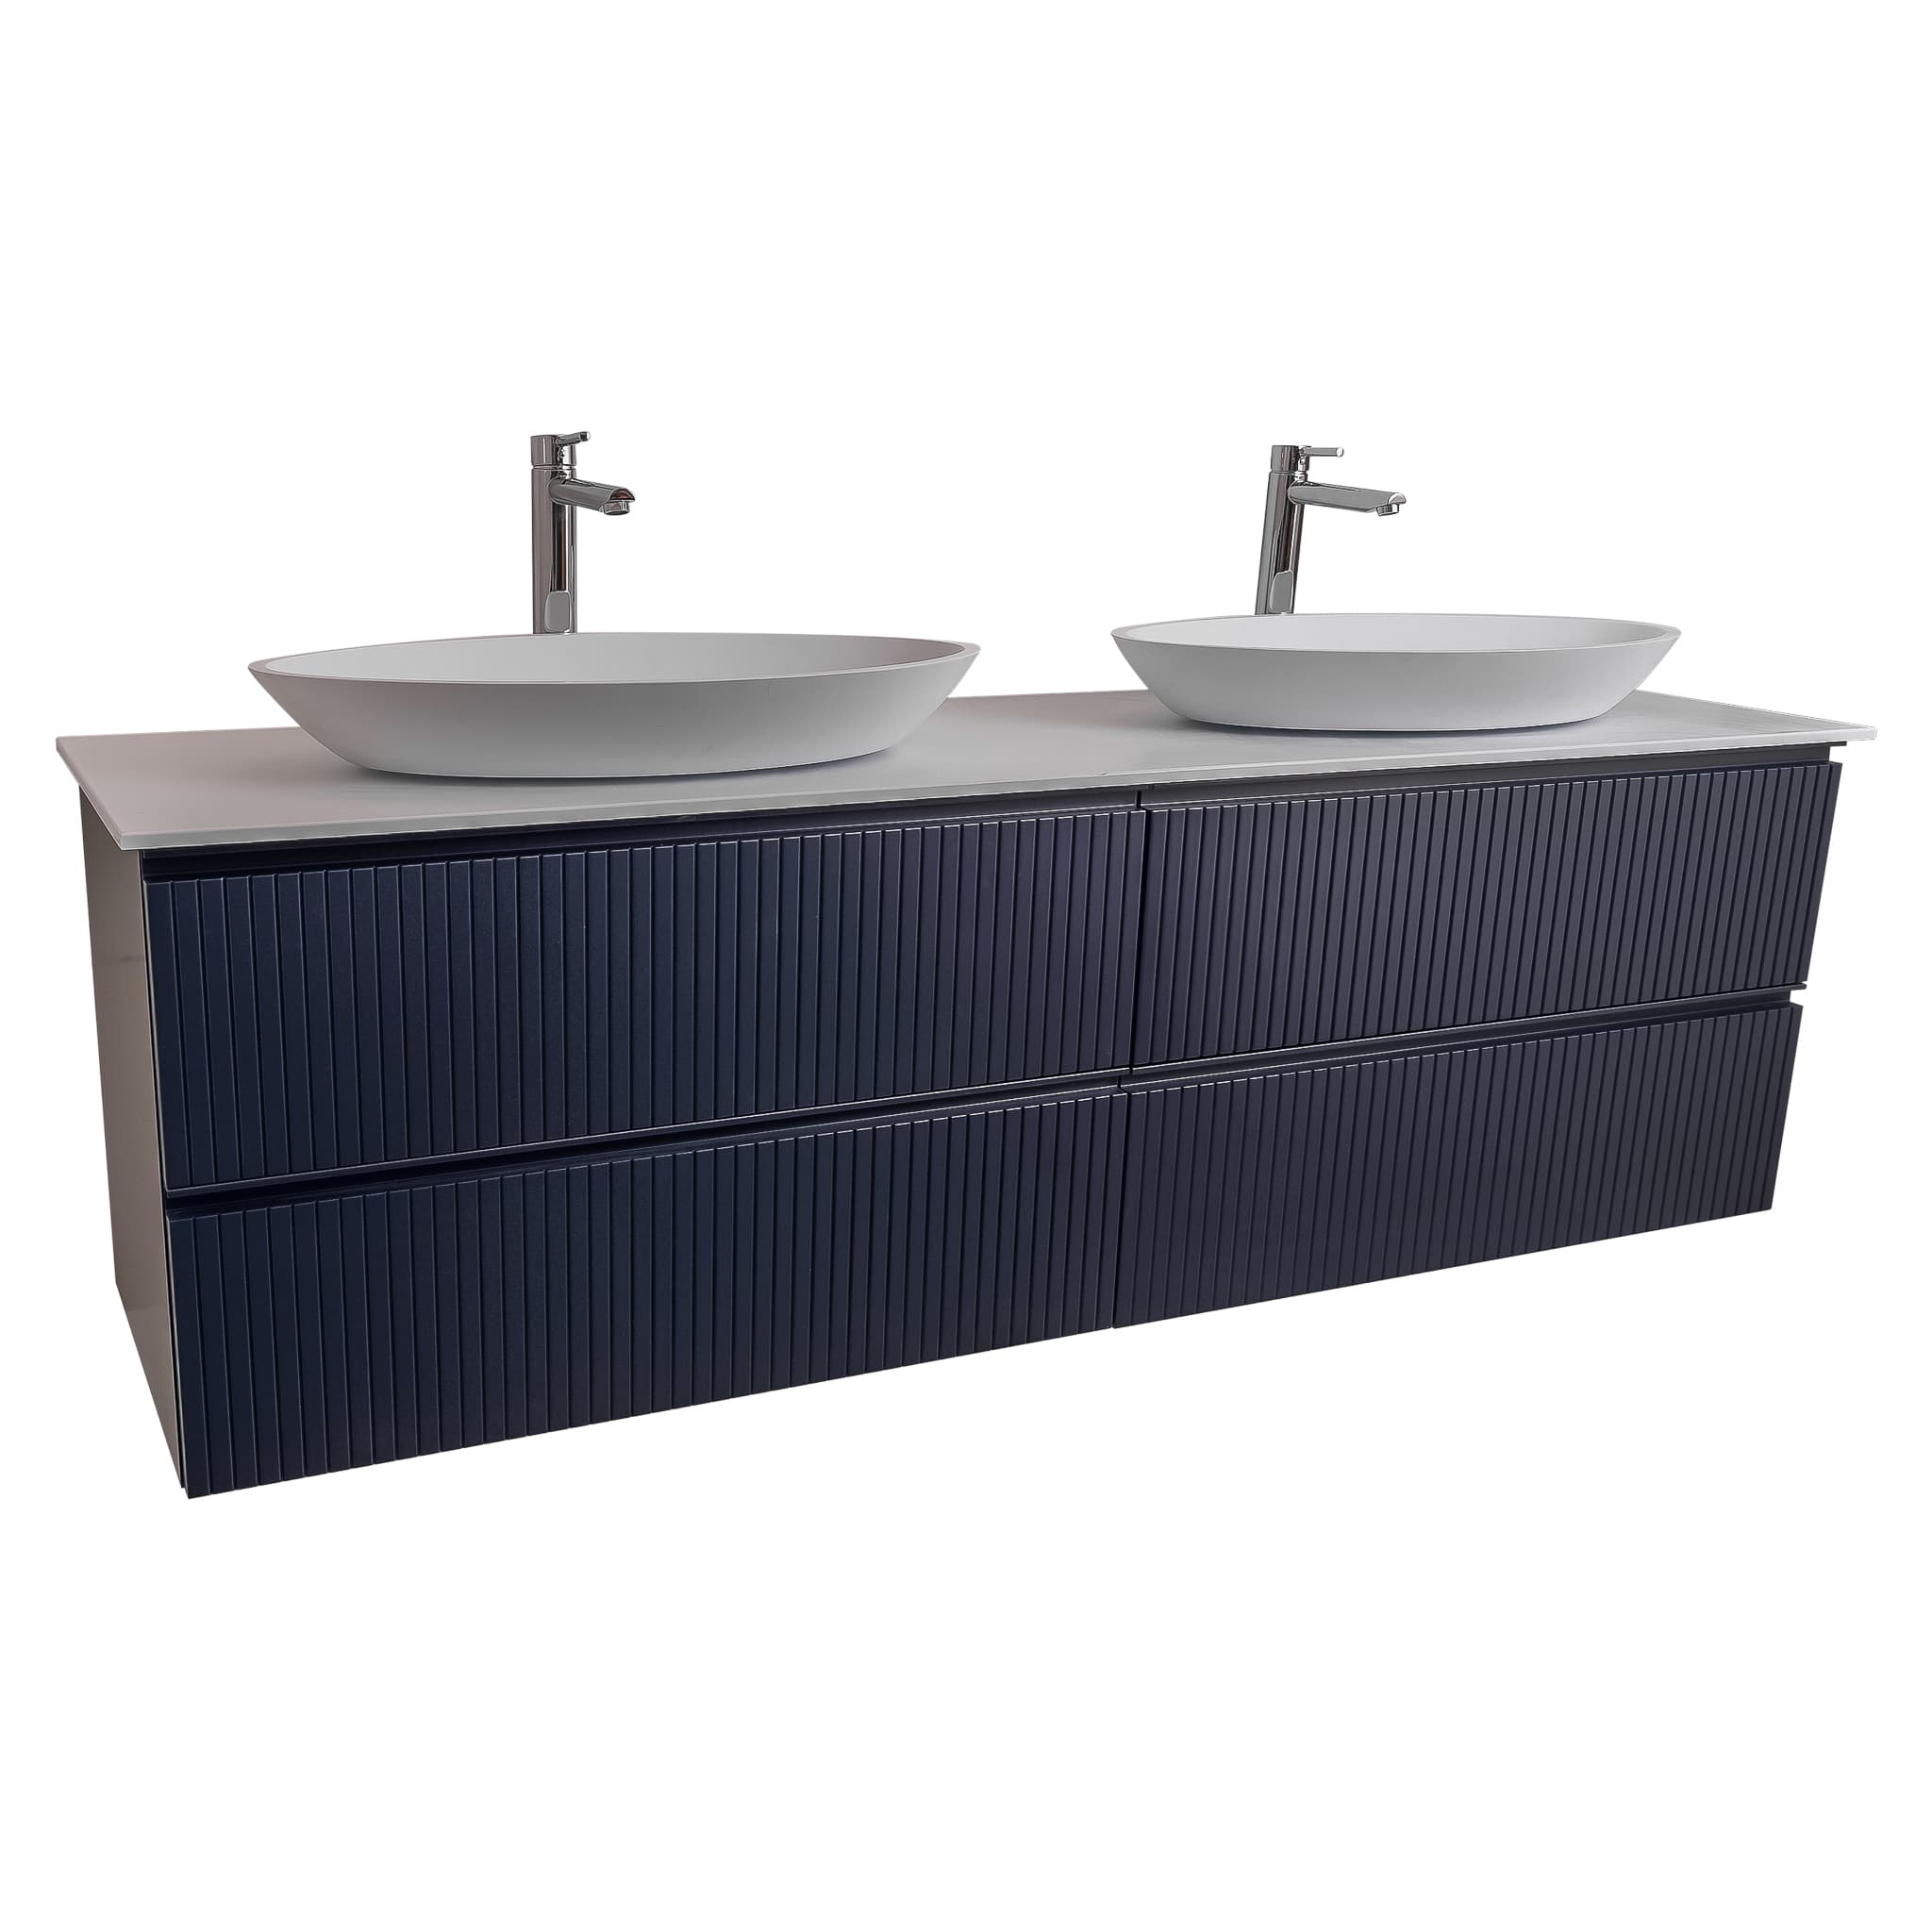 Ares 63 Matte Navy Blue Cabinet, Solid Surface Flat White Counter And Two Oval Solid Surface White Basin 1305, Wall Mounted Modern Vanity Set